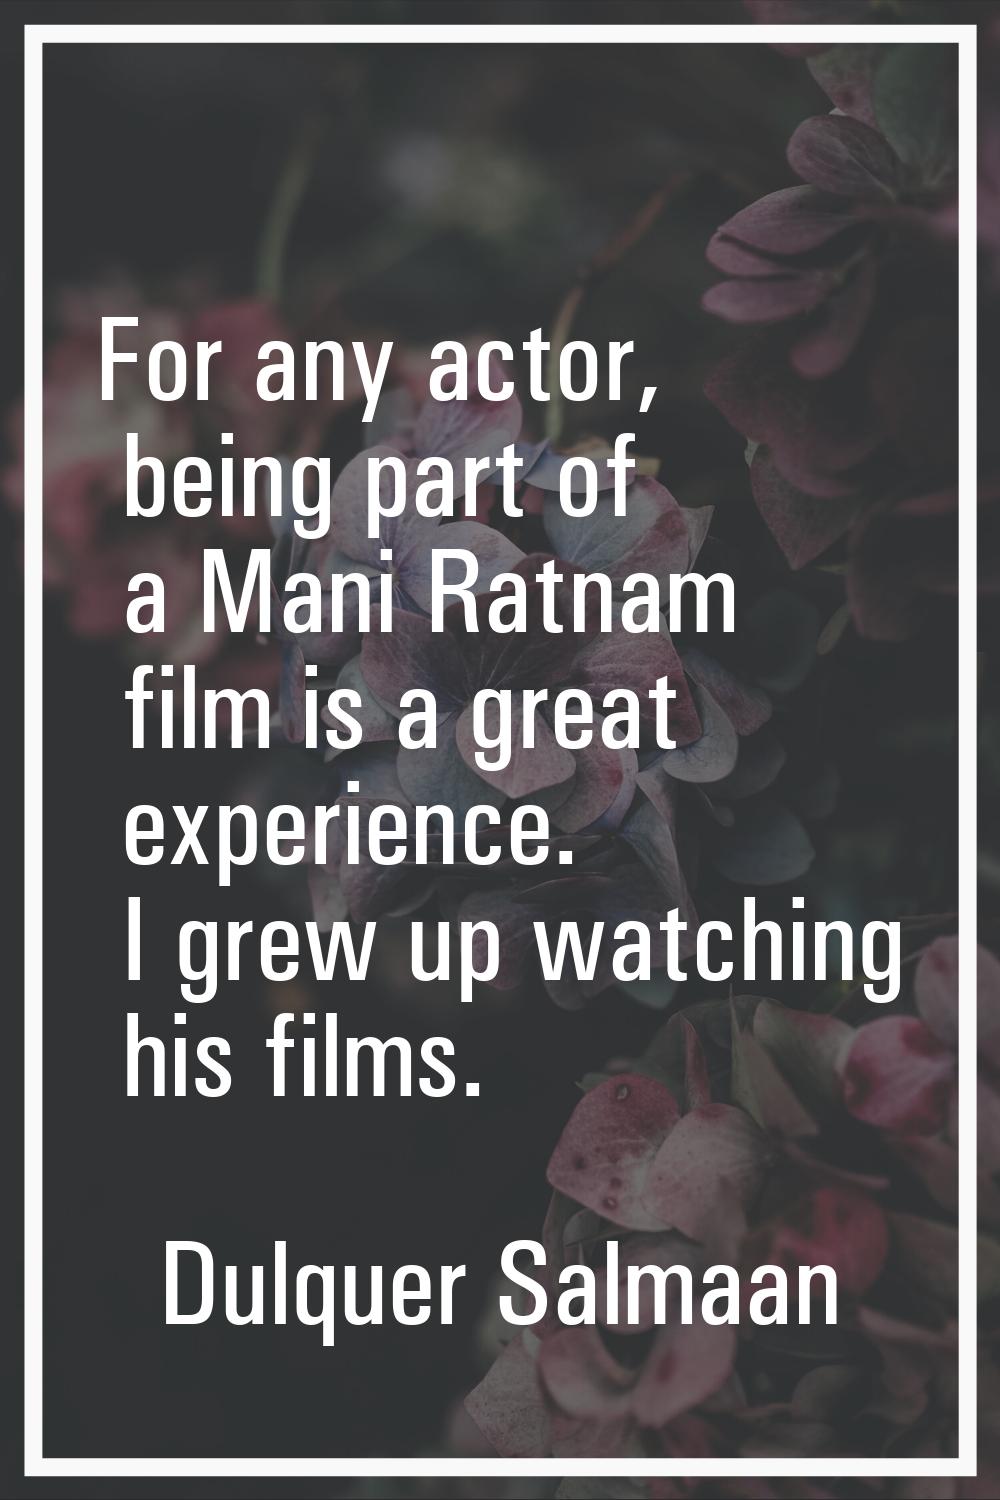 For any actor, being part of a Mani Ratnam film is a great experience. I grew up watching his films